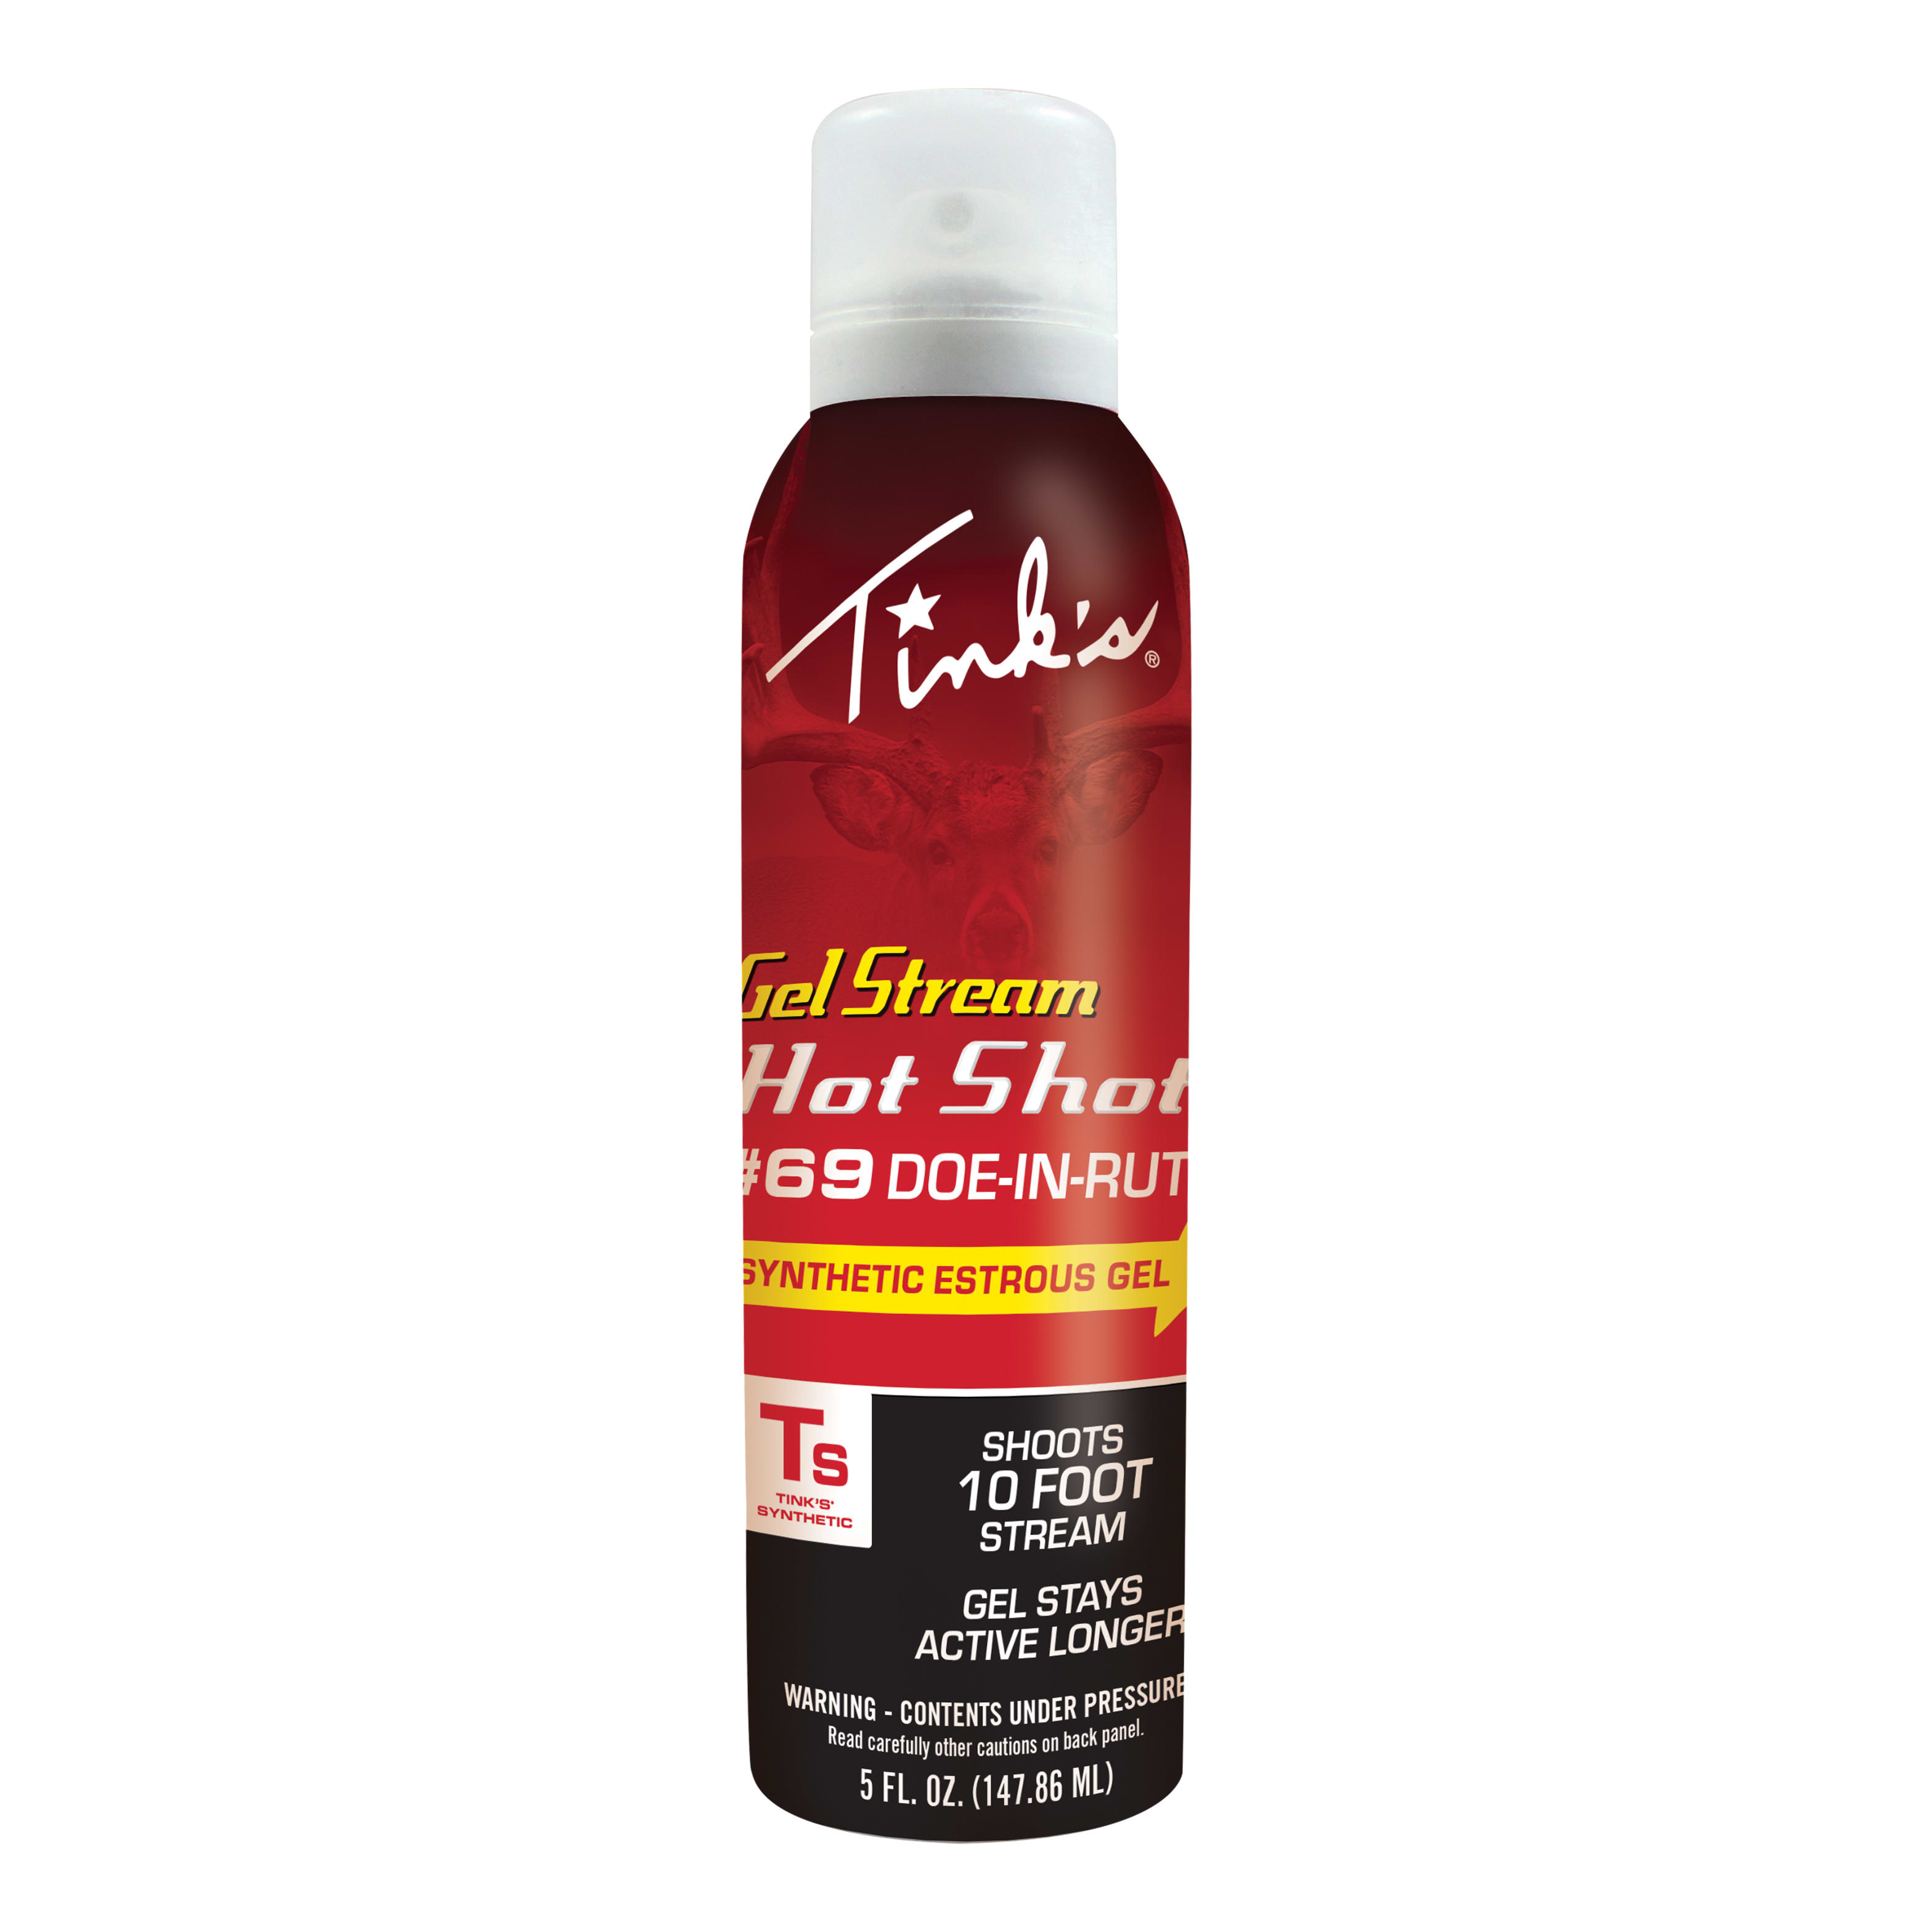 Tink’s #69 Doe-In-Rut Hot Shot Synthetic Gel Stream